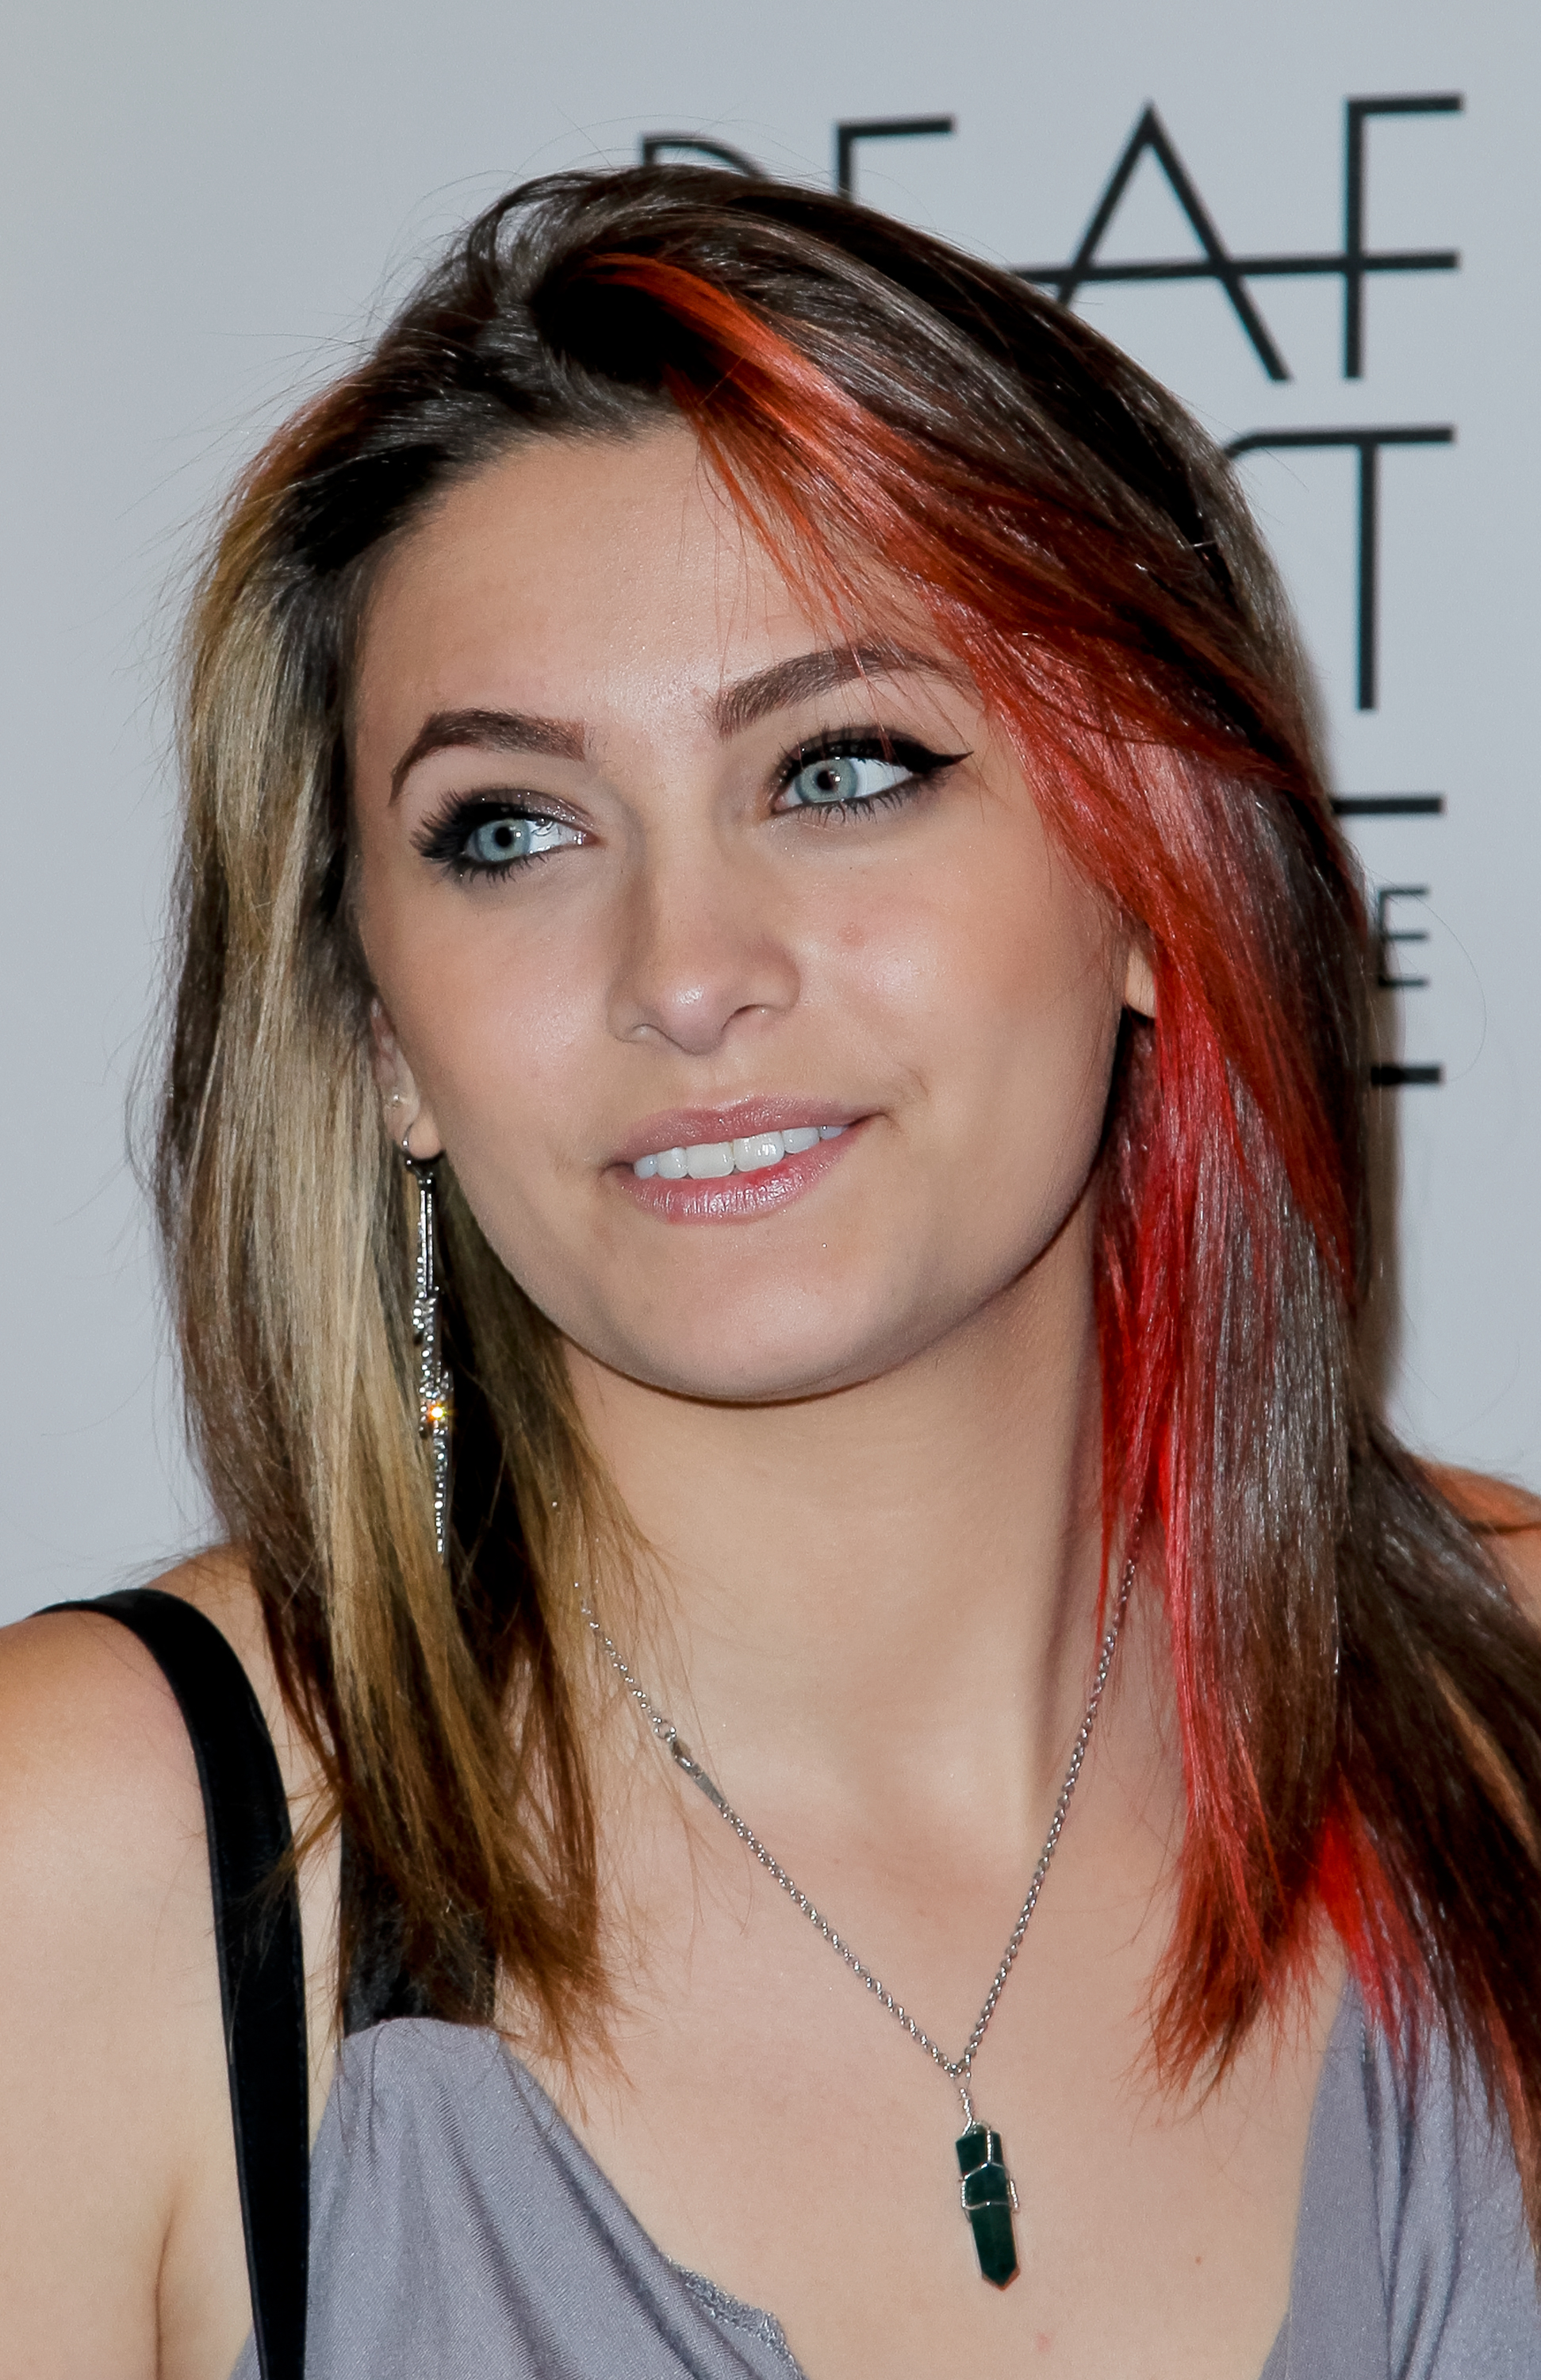 Paris Jackson at the opening night of Deaf West Theatre's "Spring Awakening" in Beverly Hills, California on May 28, 2015 | Source: Getty Images